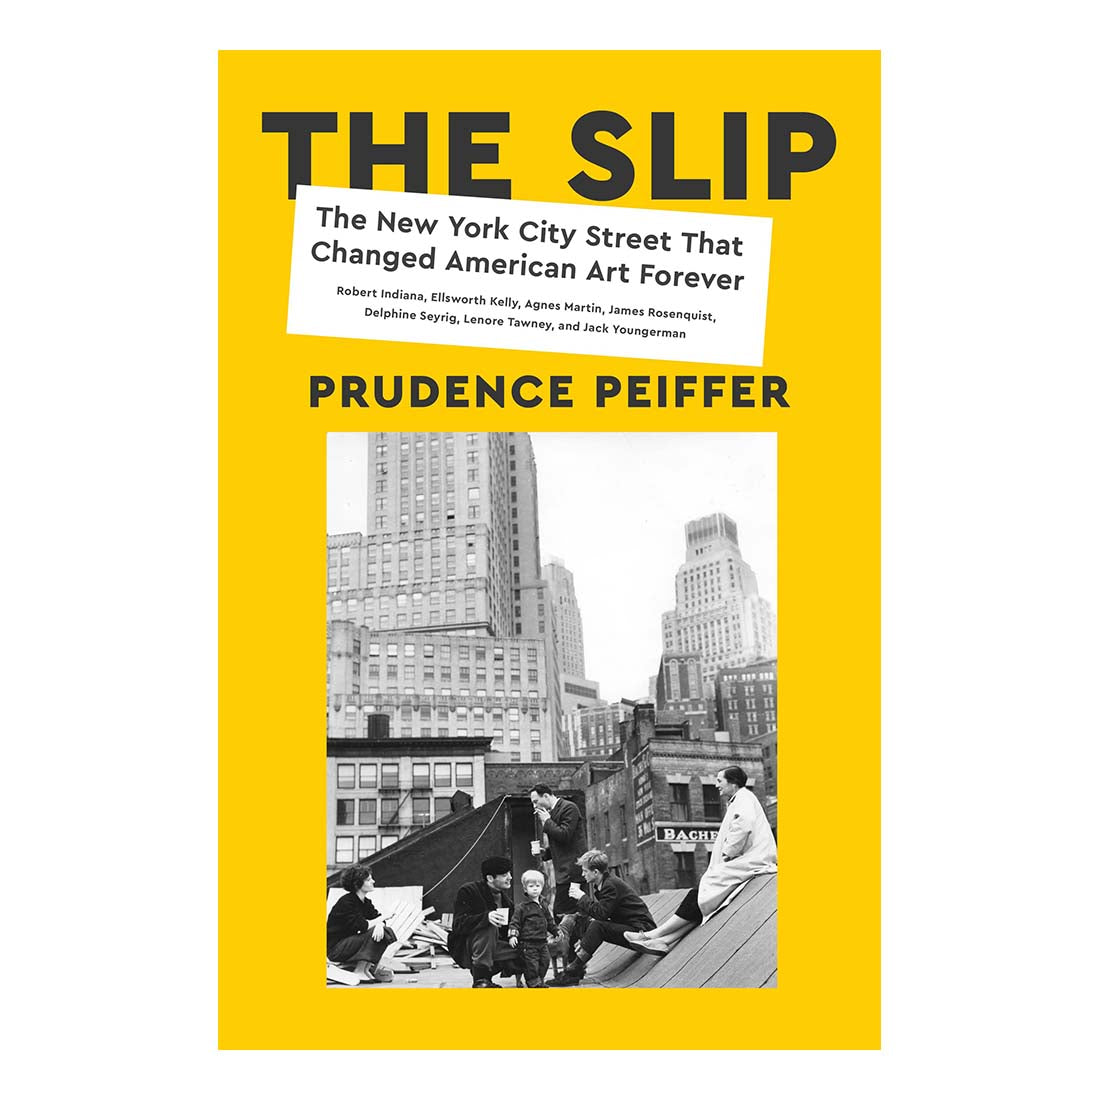 The Slip: The New York City Street That Changed American Art Forever